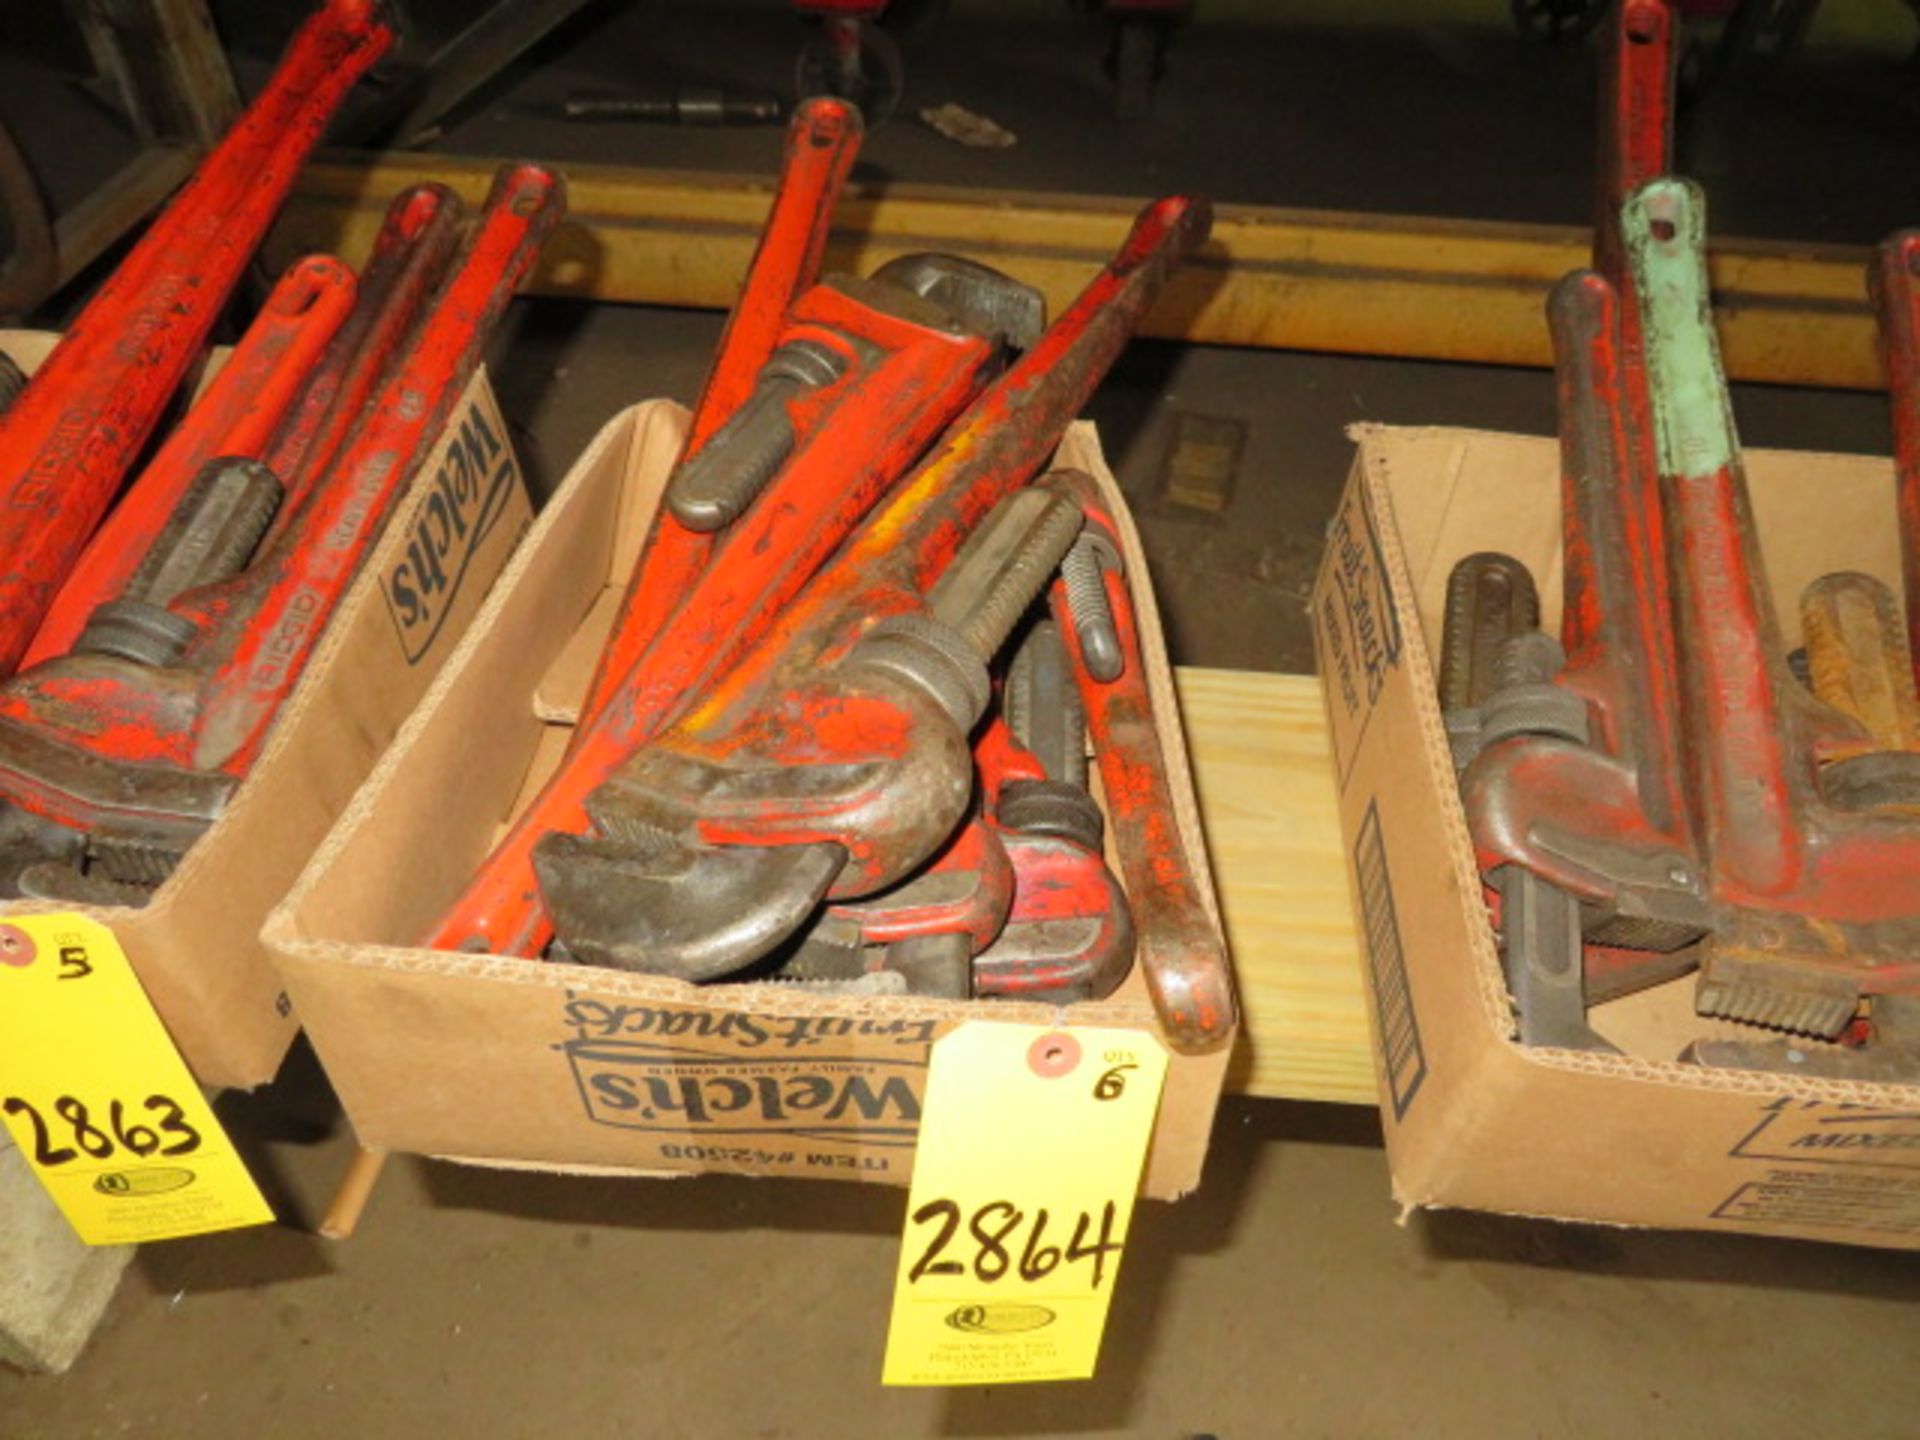 6- RIGID STEEL PIPE WRENCHES, 14" - 24"